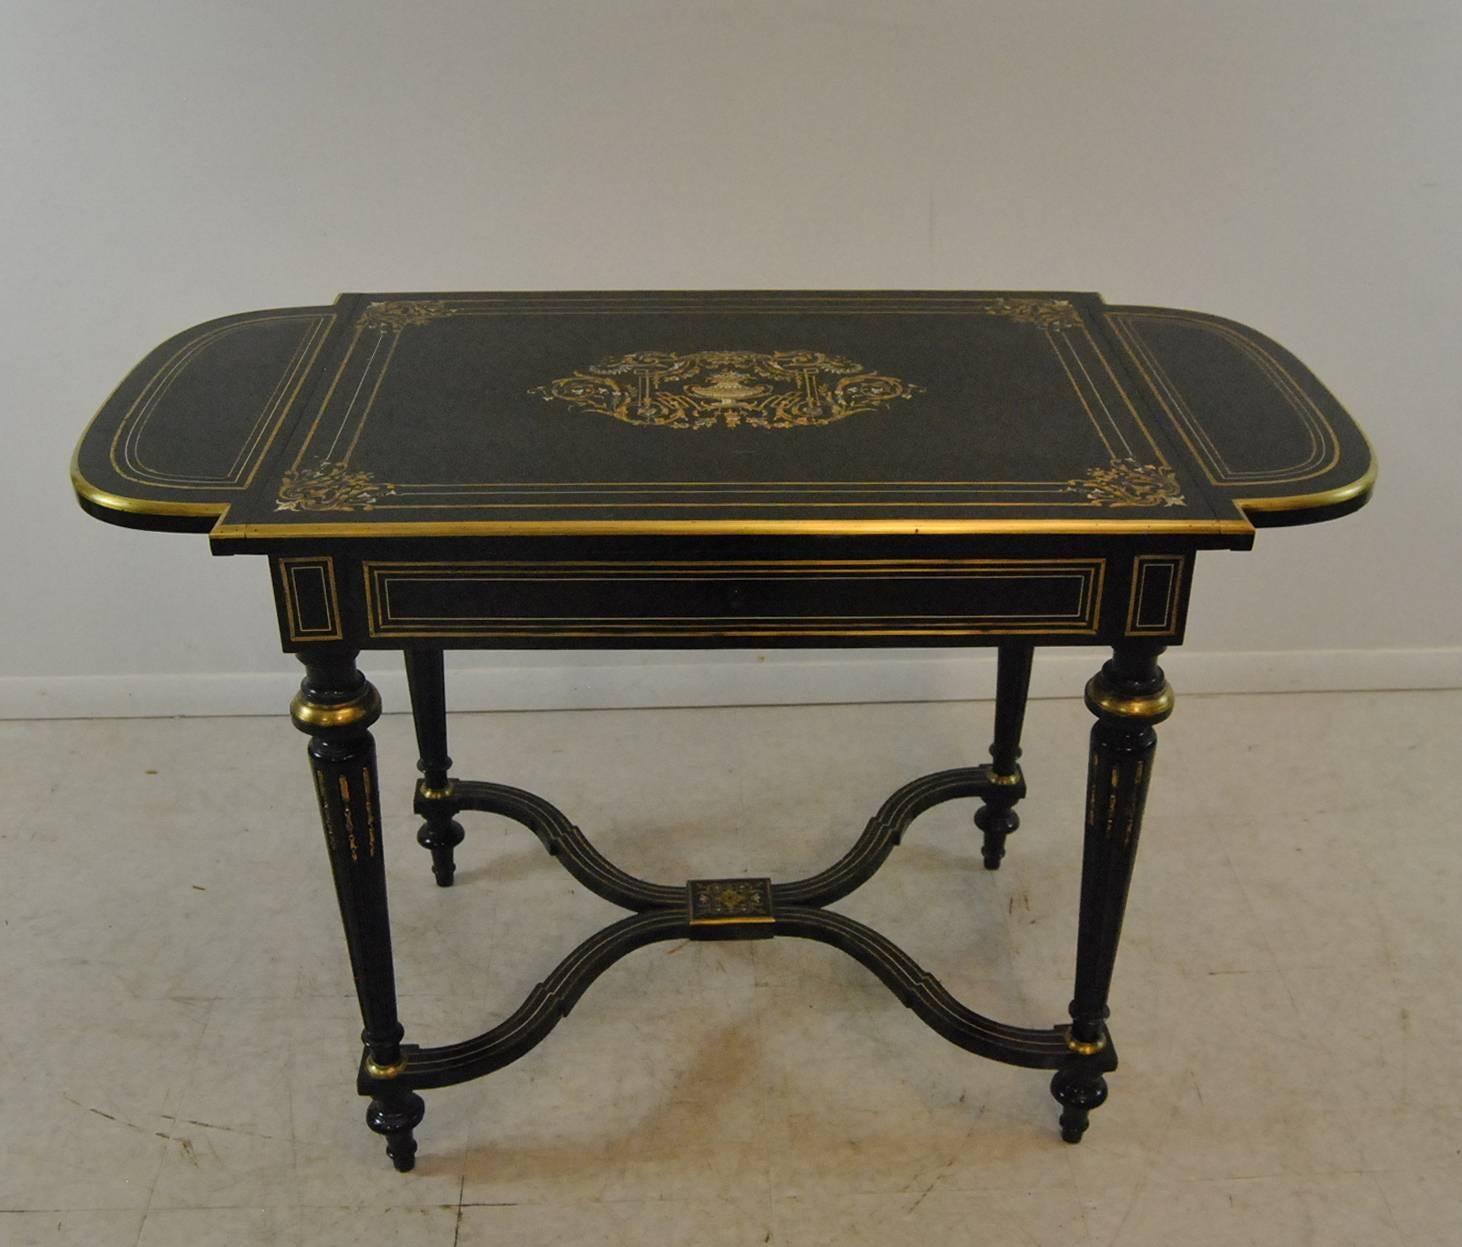 19th Century Ebonized Drop Leaf Table with Inlaid Mother-of-Pearl and Brass In Good Condition For Sale In Toledo, OH